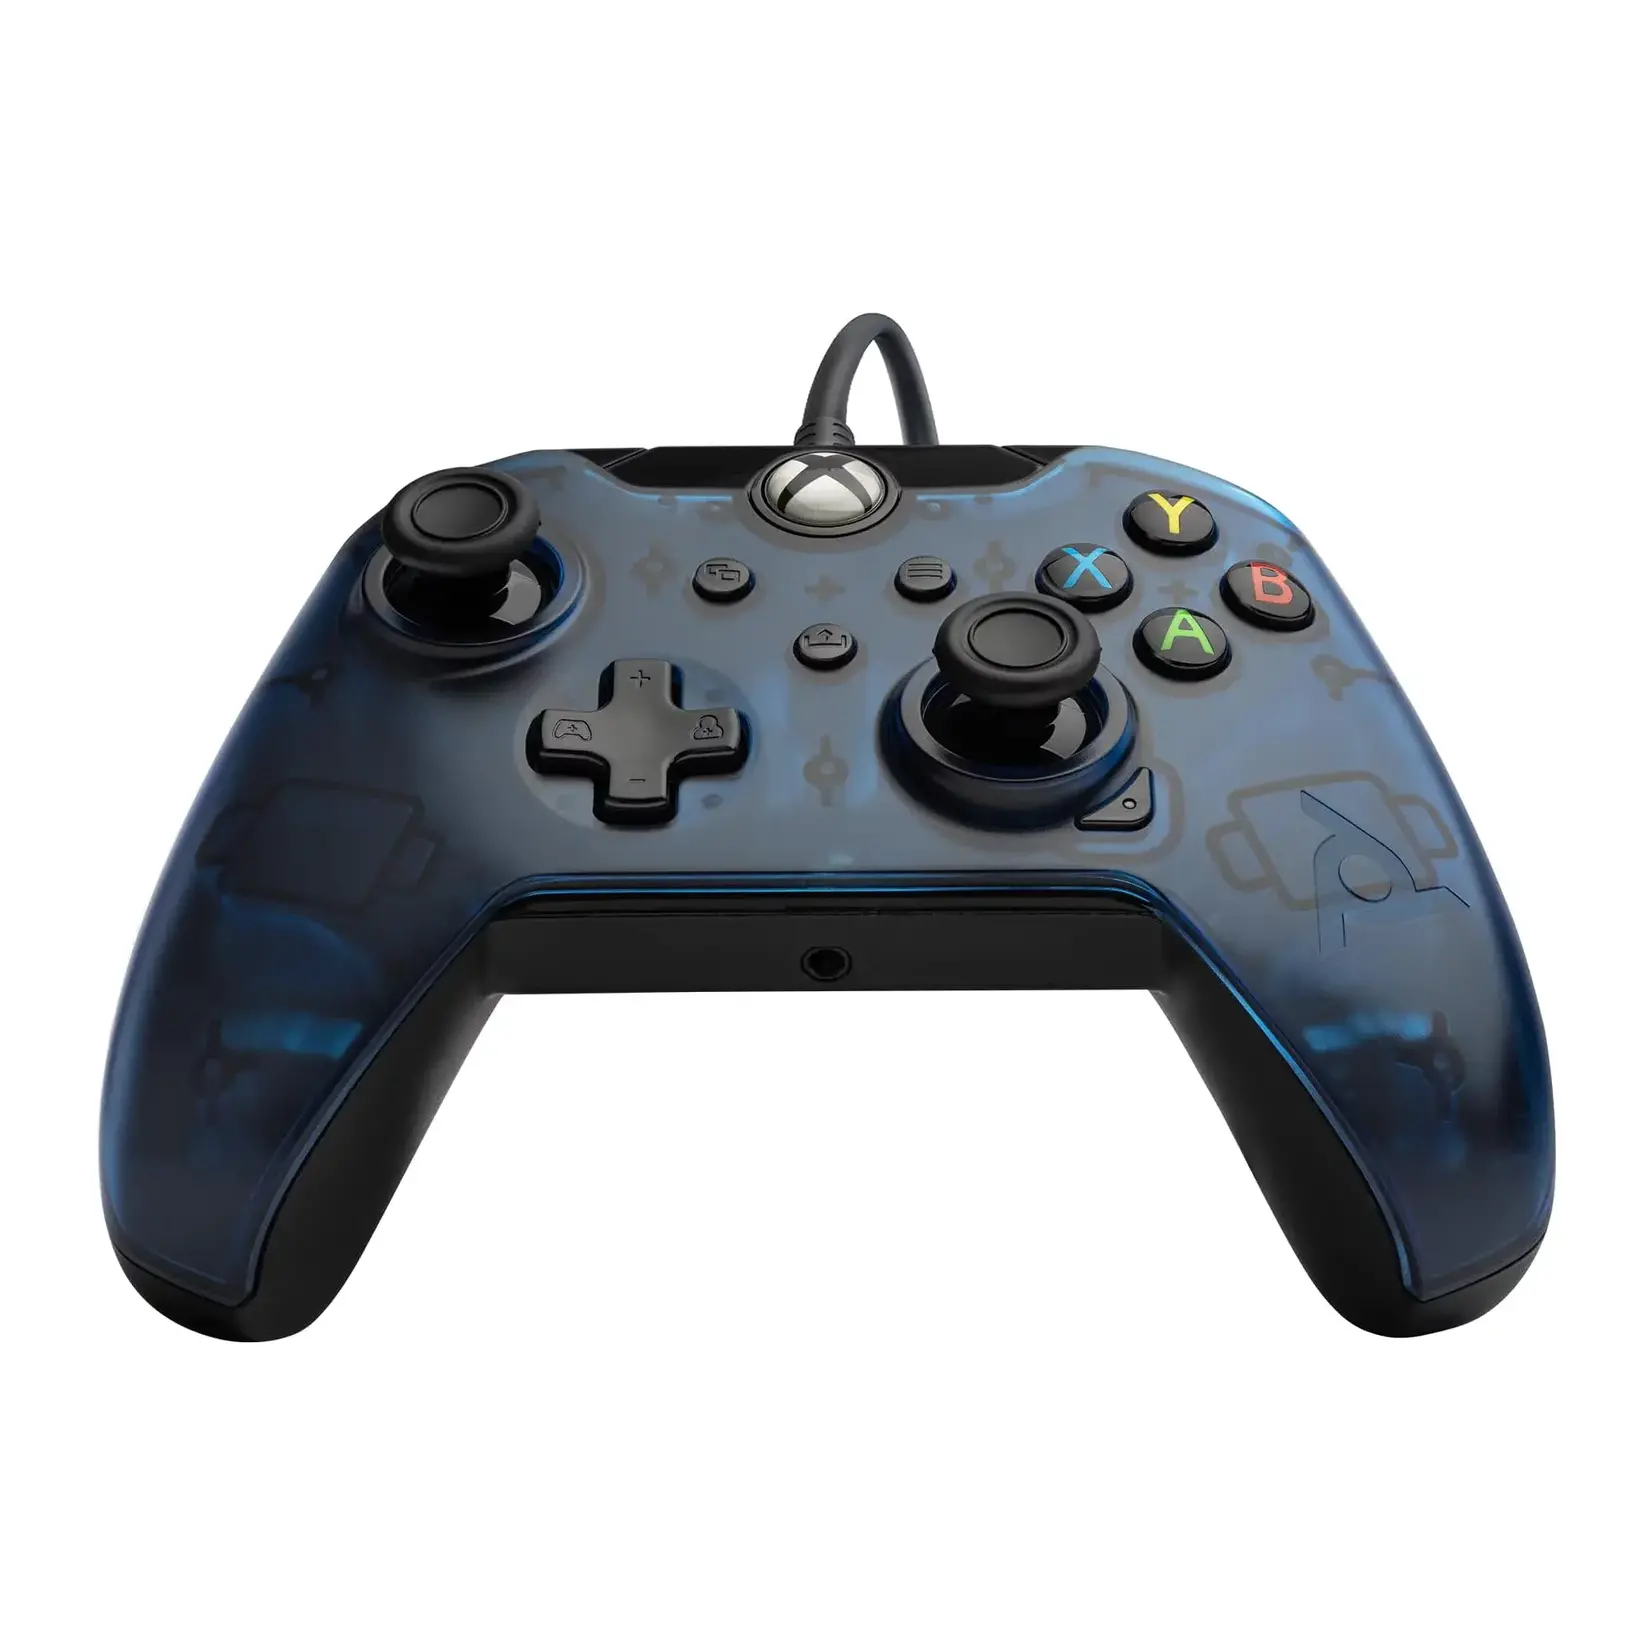 Pdp Midnight Blue Wired Gaming Controller for Xbox Series X, S